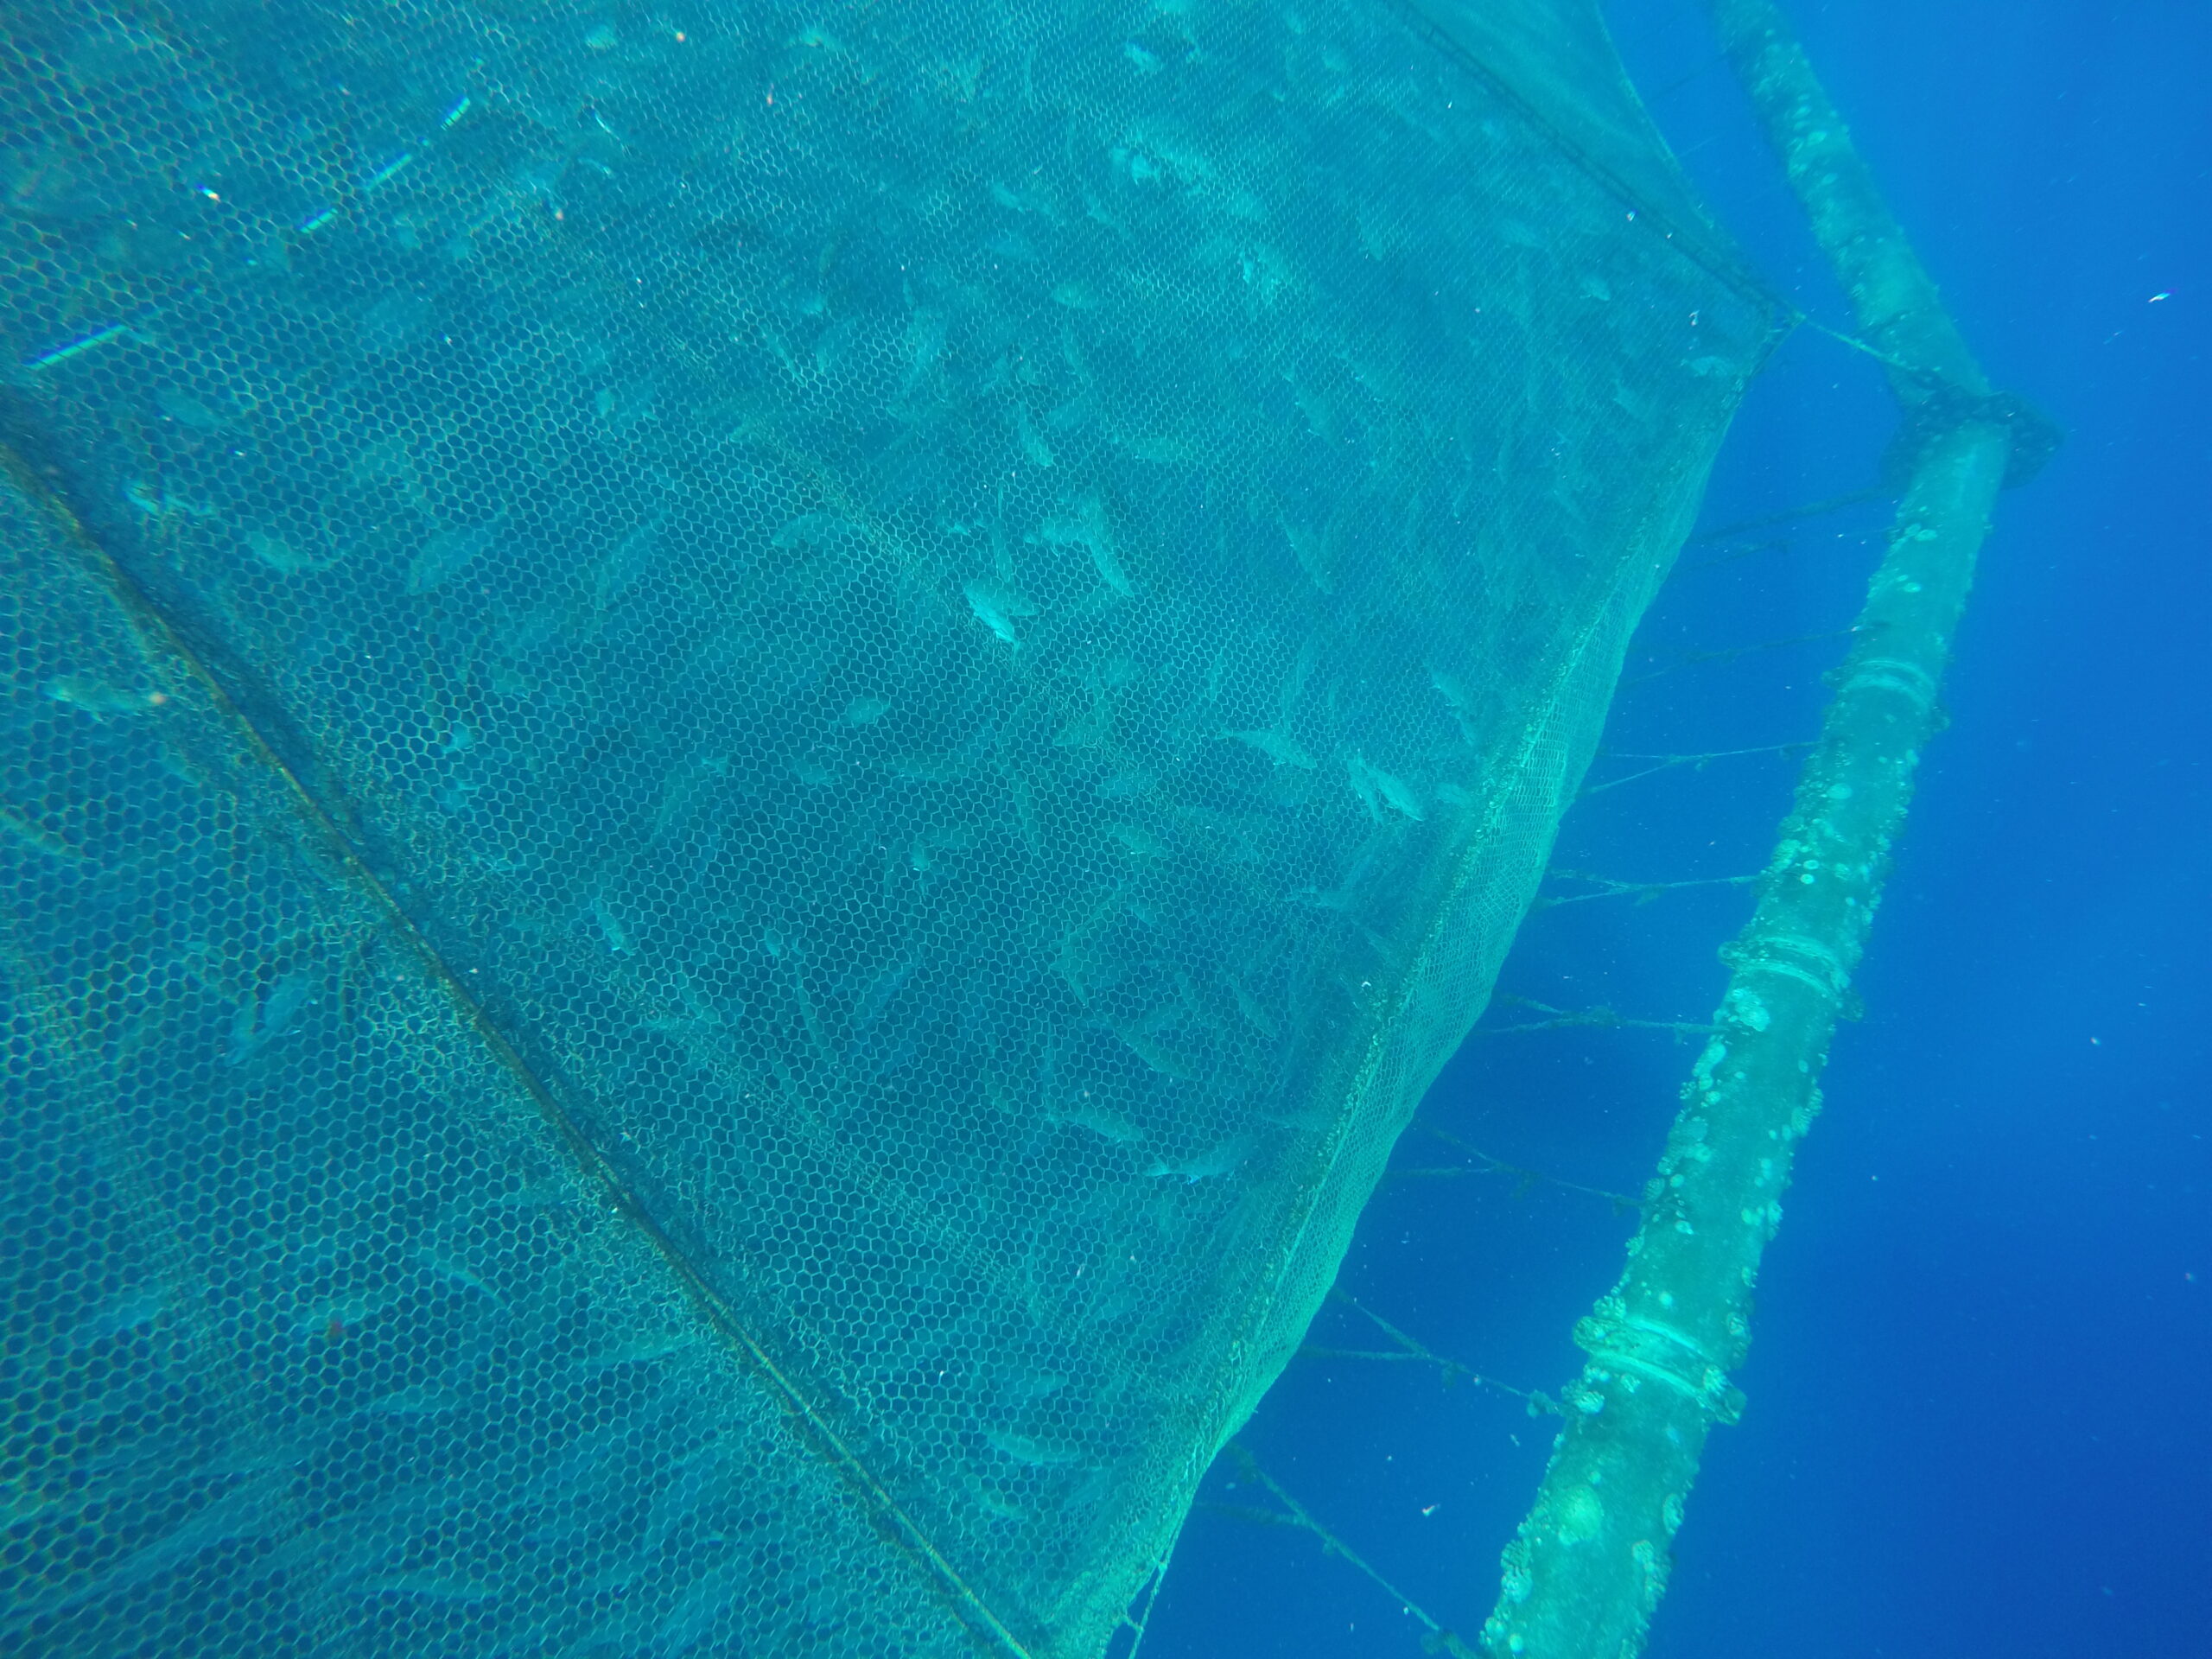 A photo of a large cage used for an aquaculture pen underwater